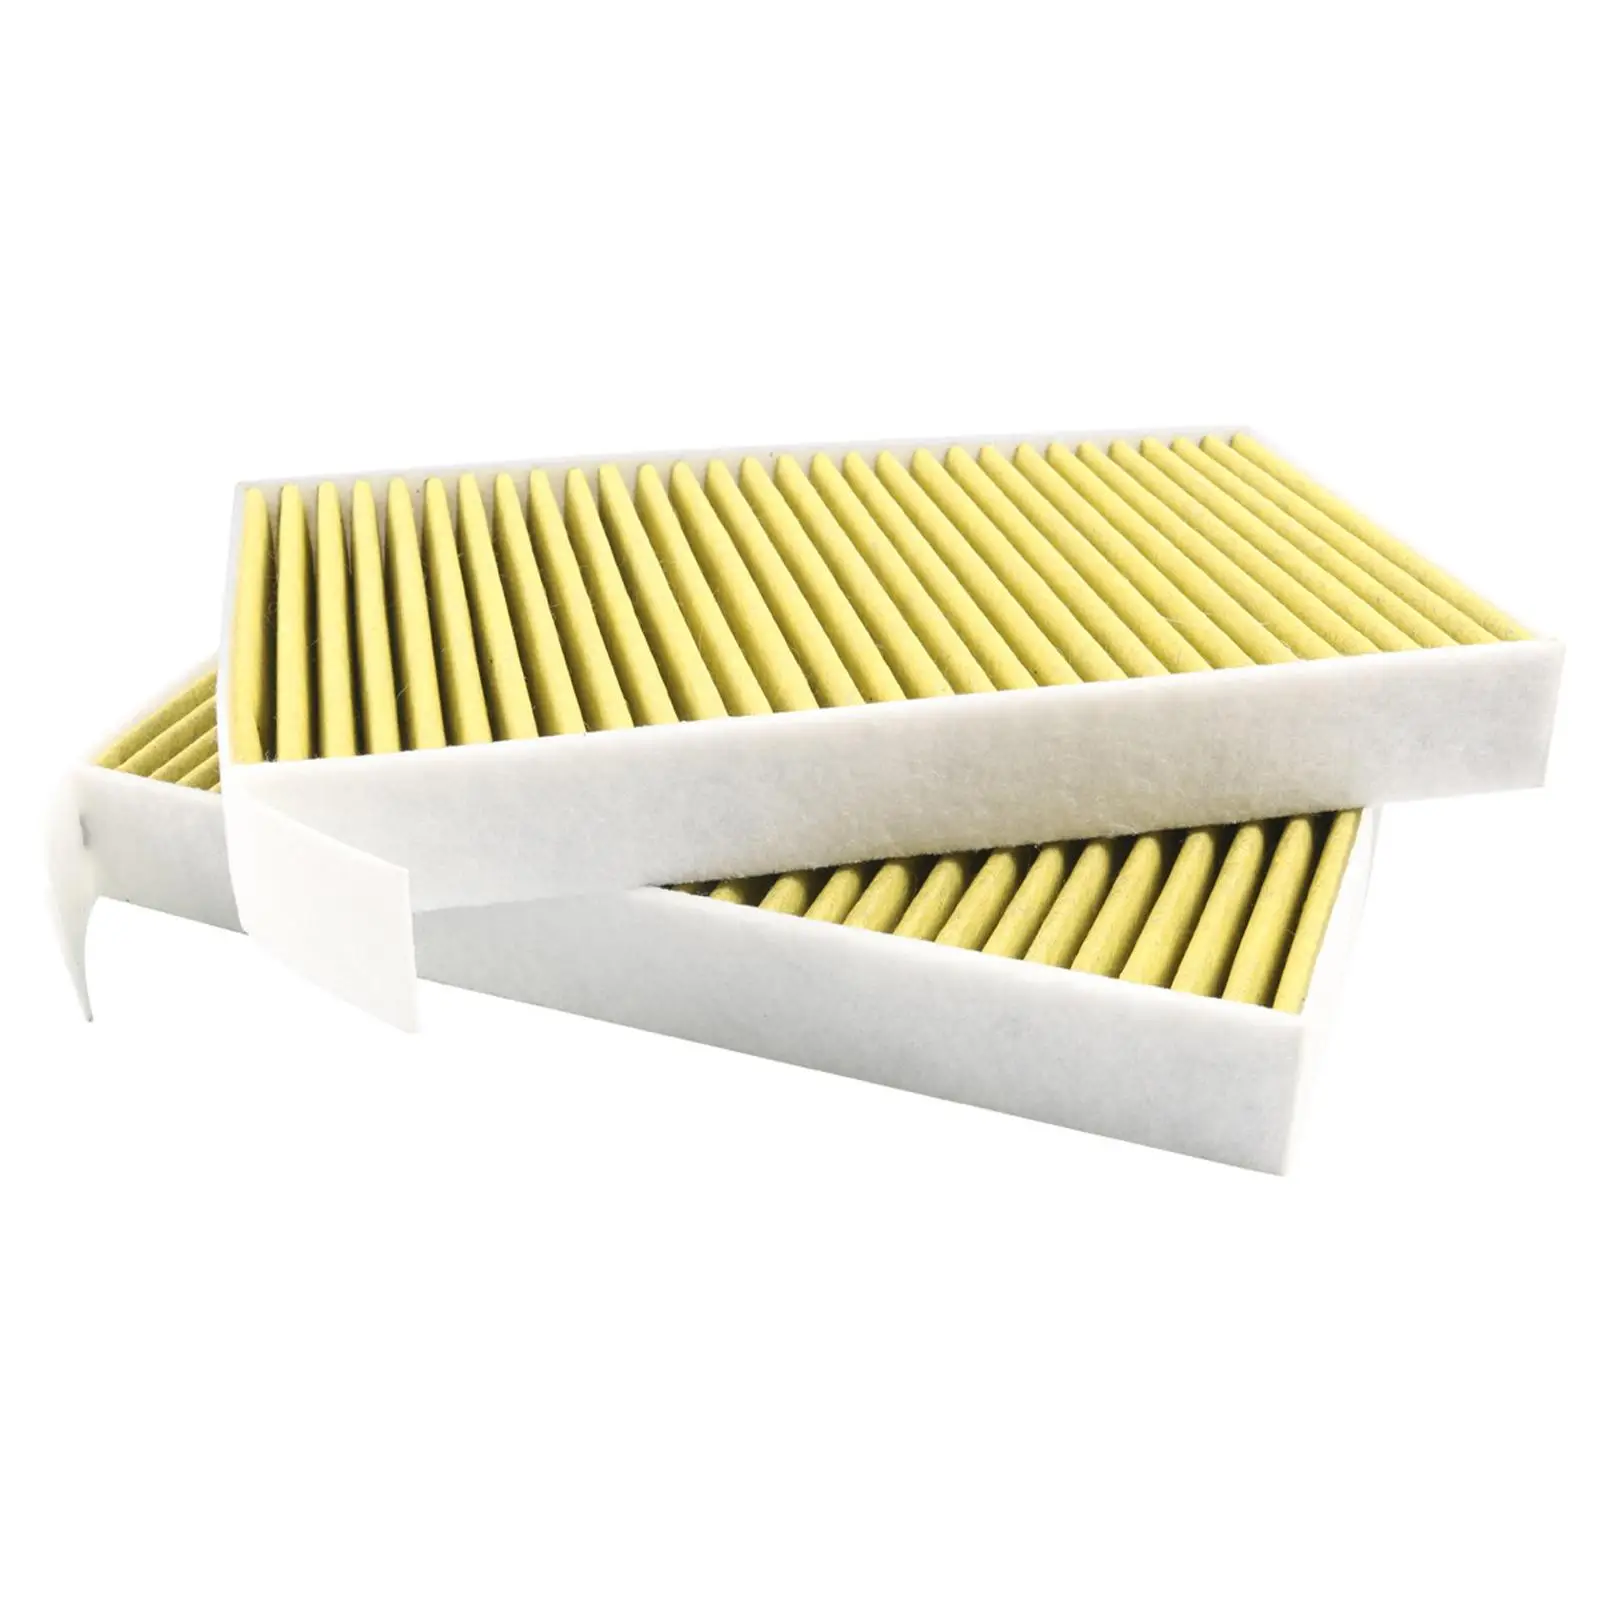 2x  Filter Auto Parts Replacement Car Supplies Cabin Filter Fit for Tesla  2017-2021 1107681-00-A 110768100A